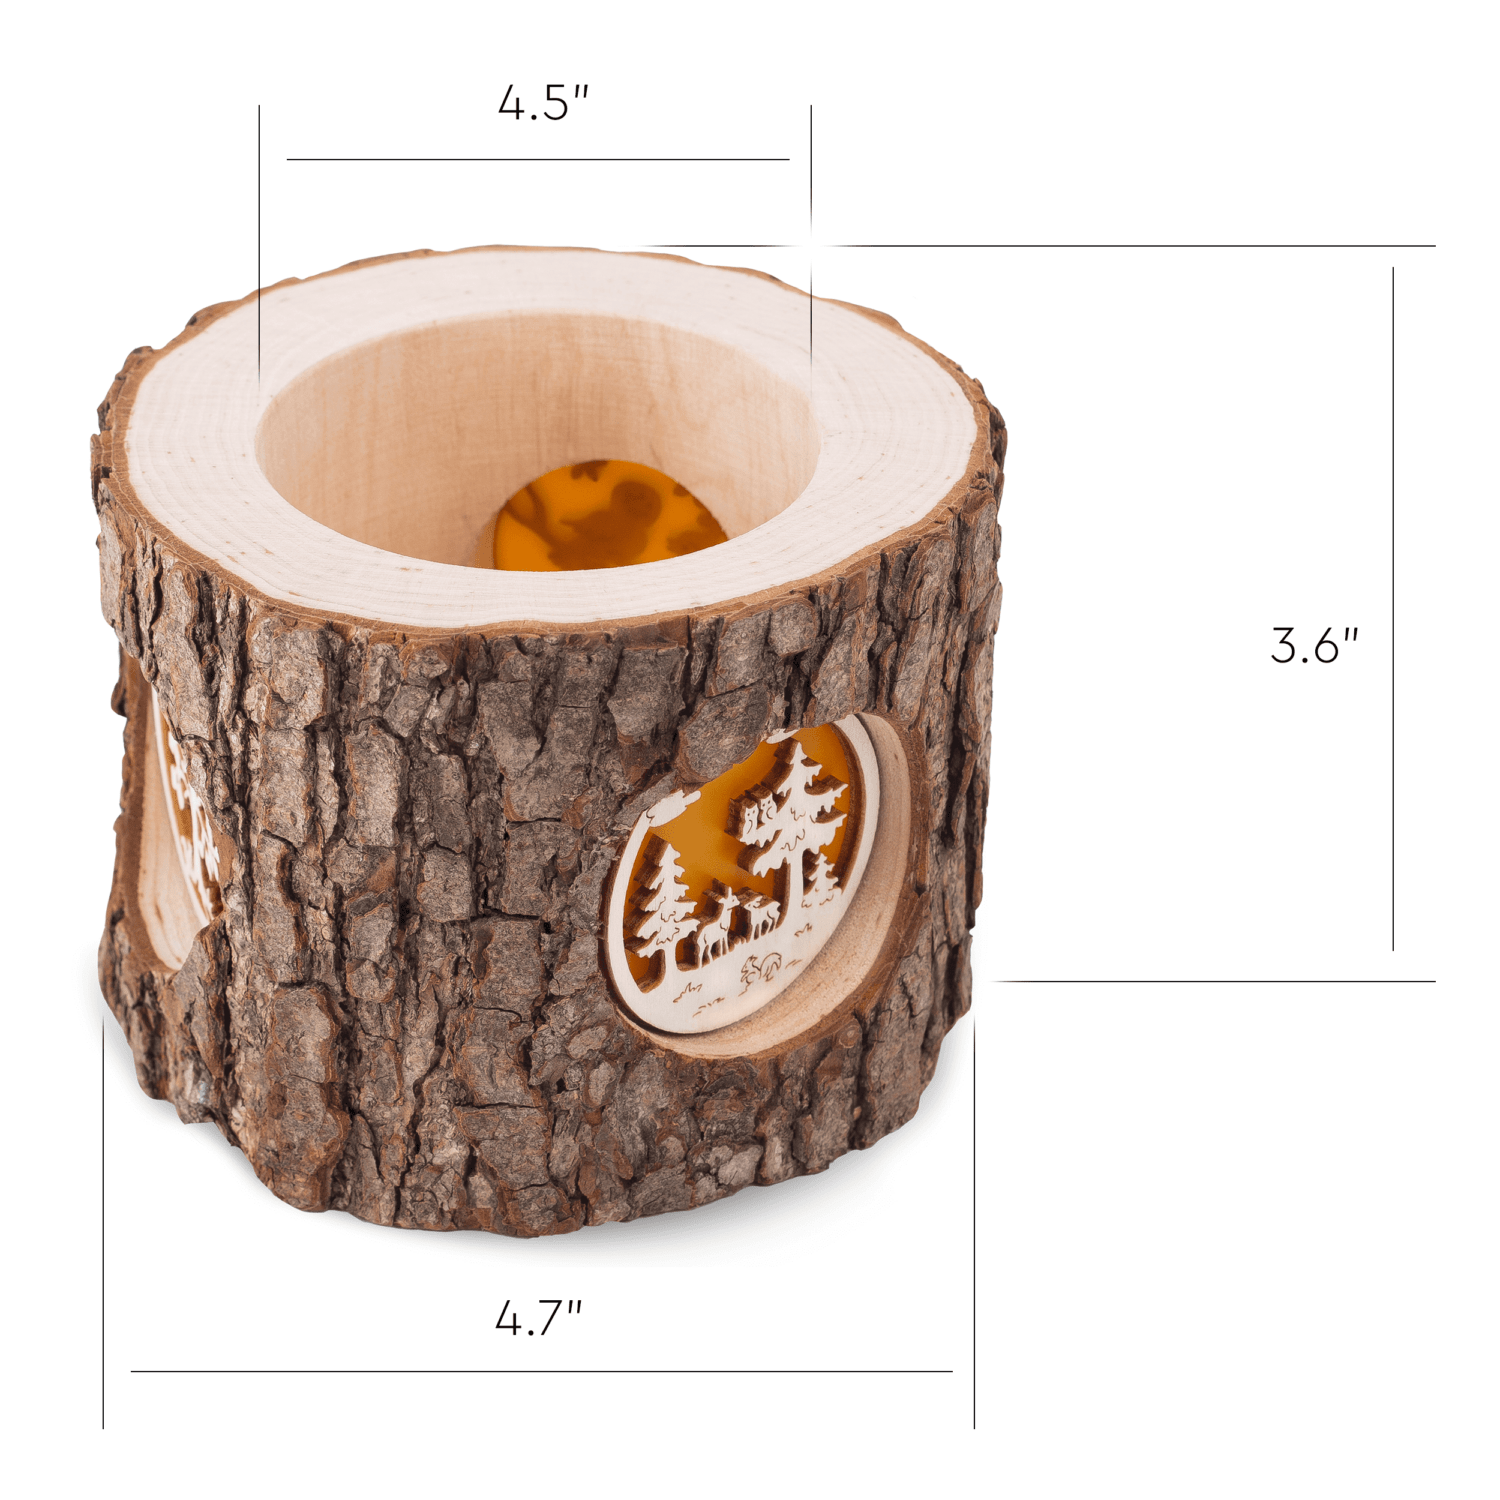 A wooden candle holder with a tree in the middle.